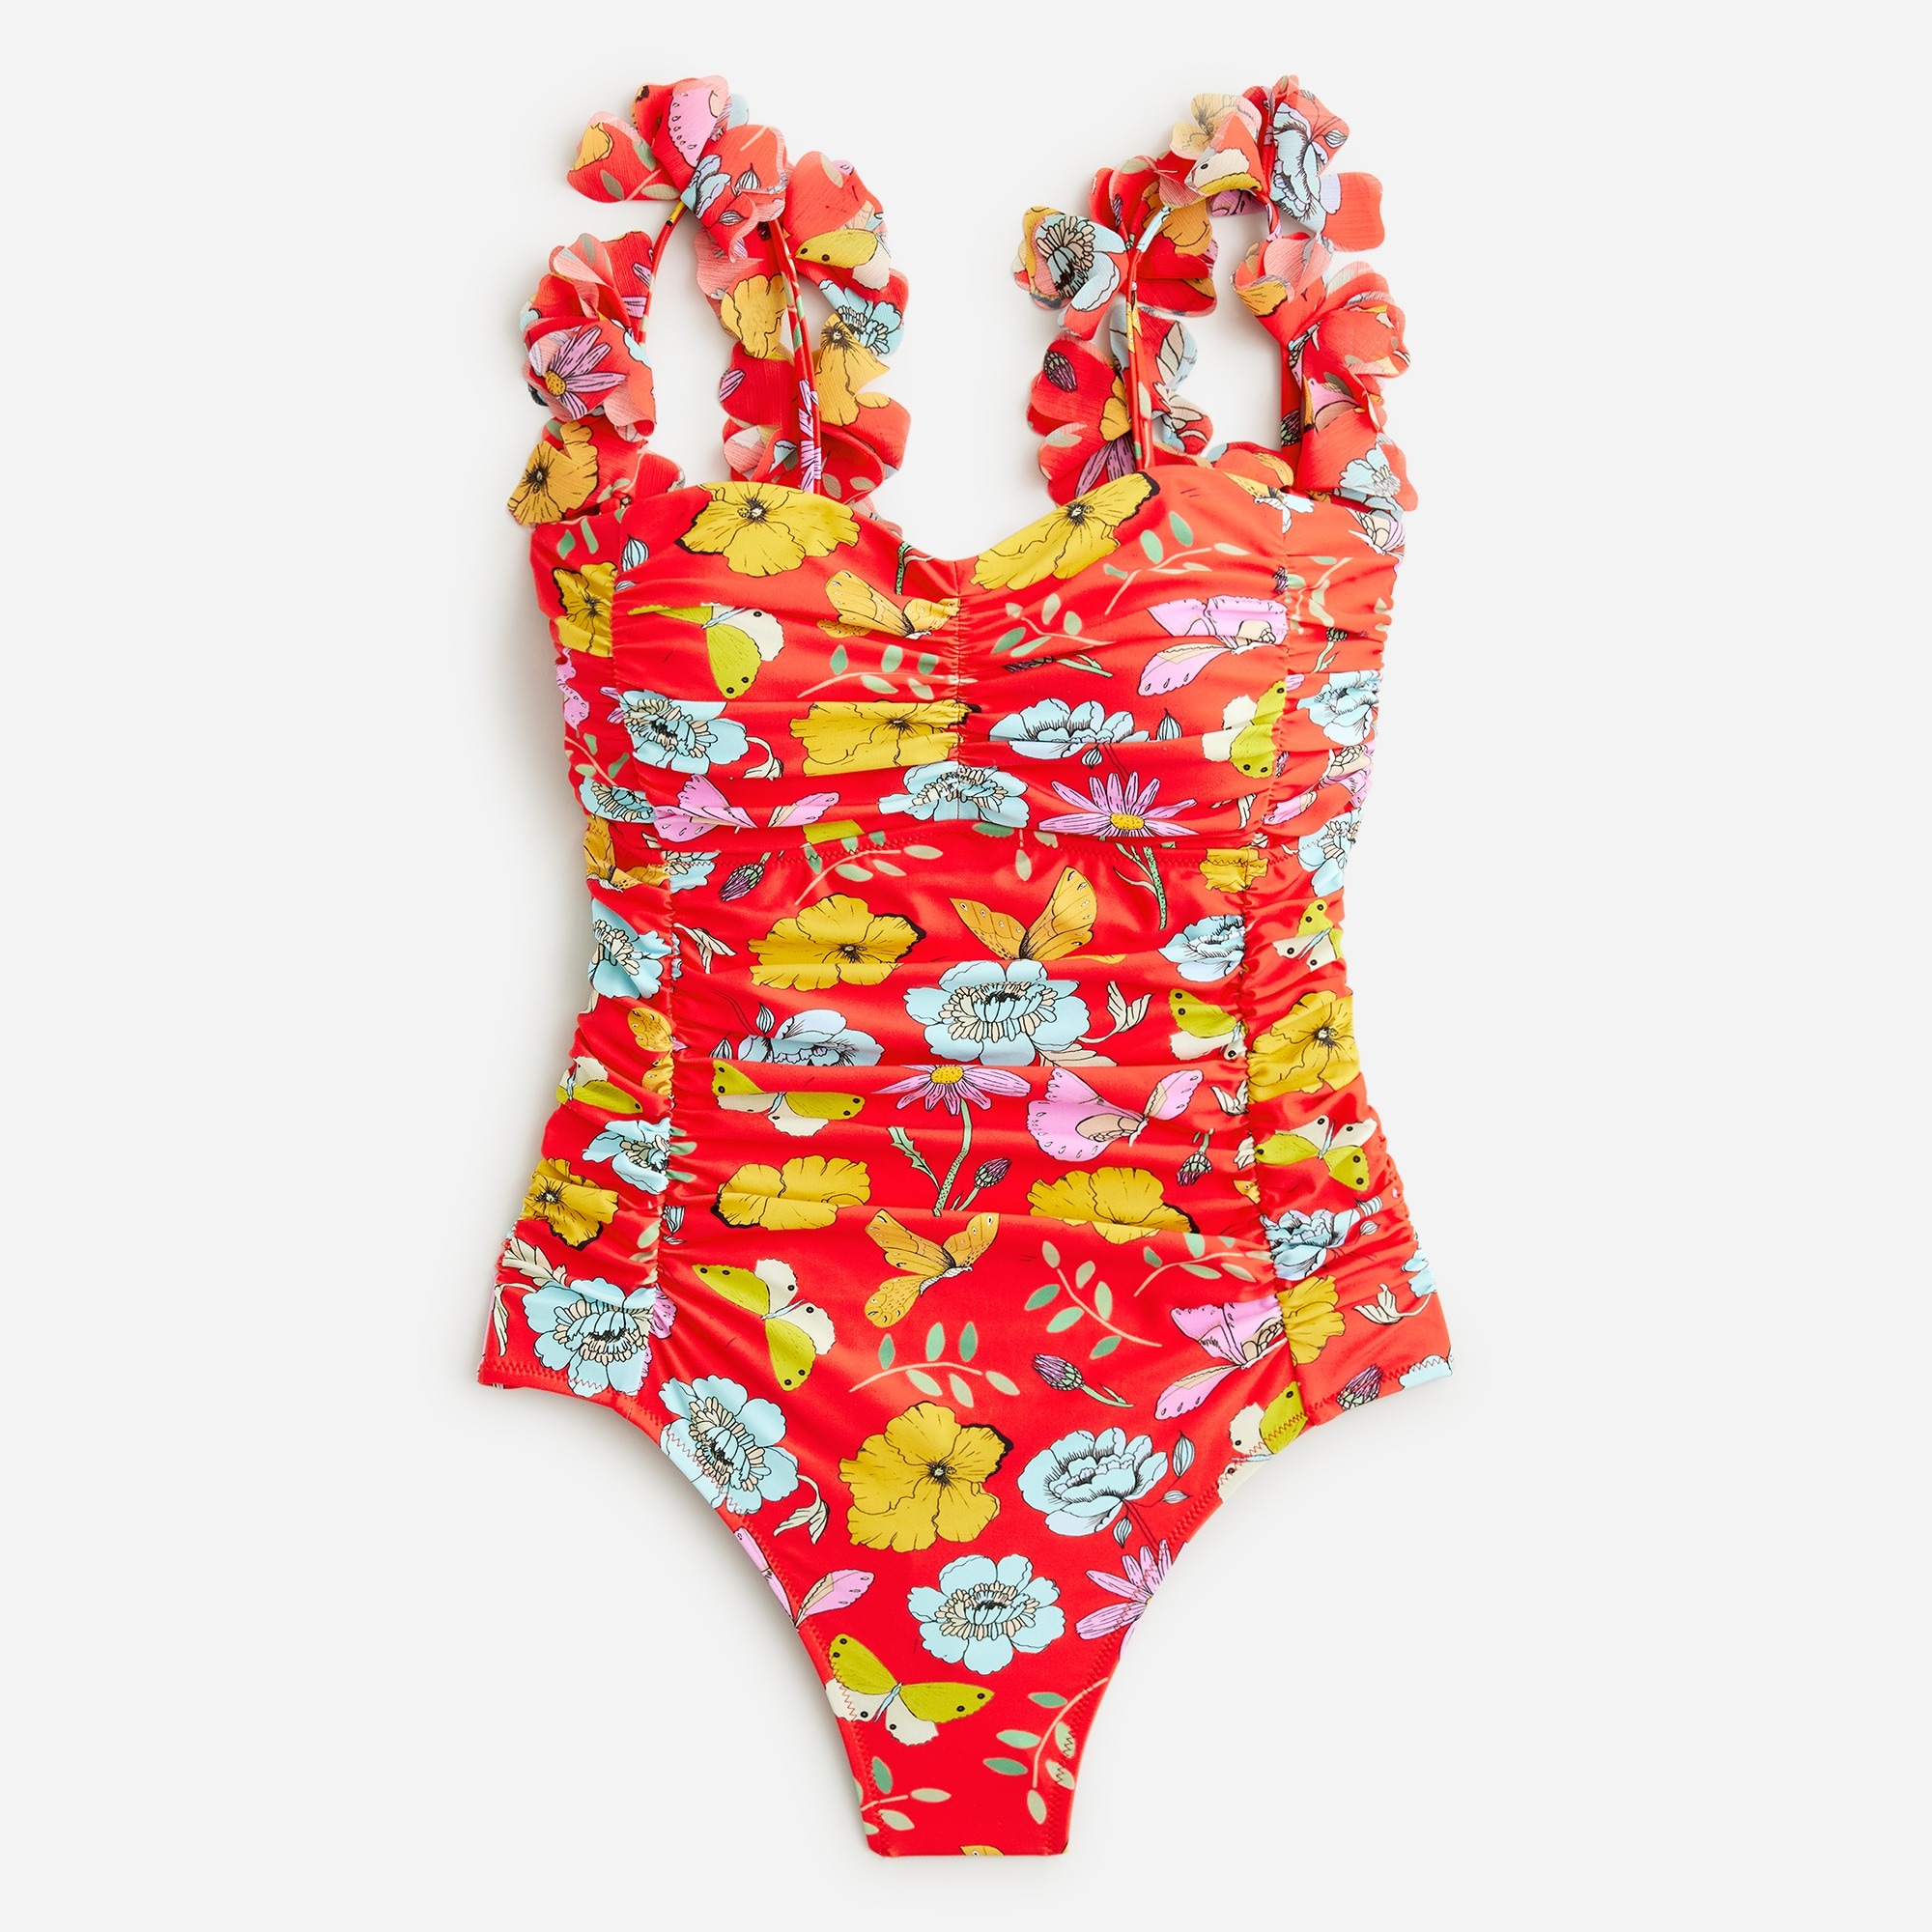  Dauphinette X J.Crew ruched flower-strap one-piece swimsuit in red blooms